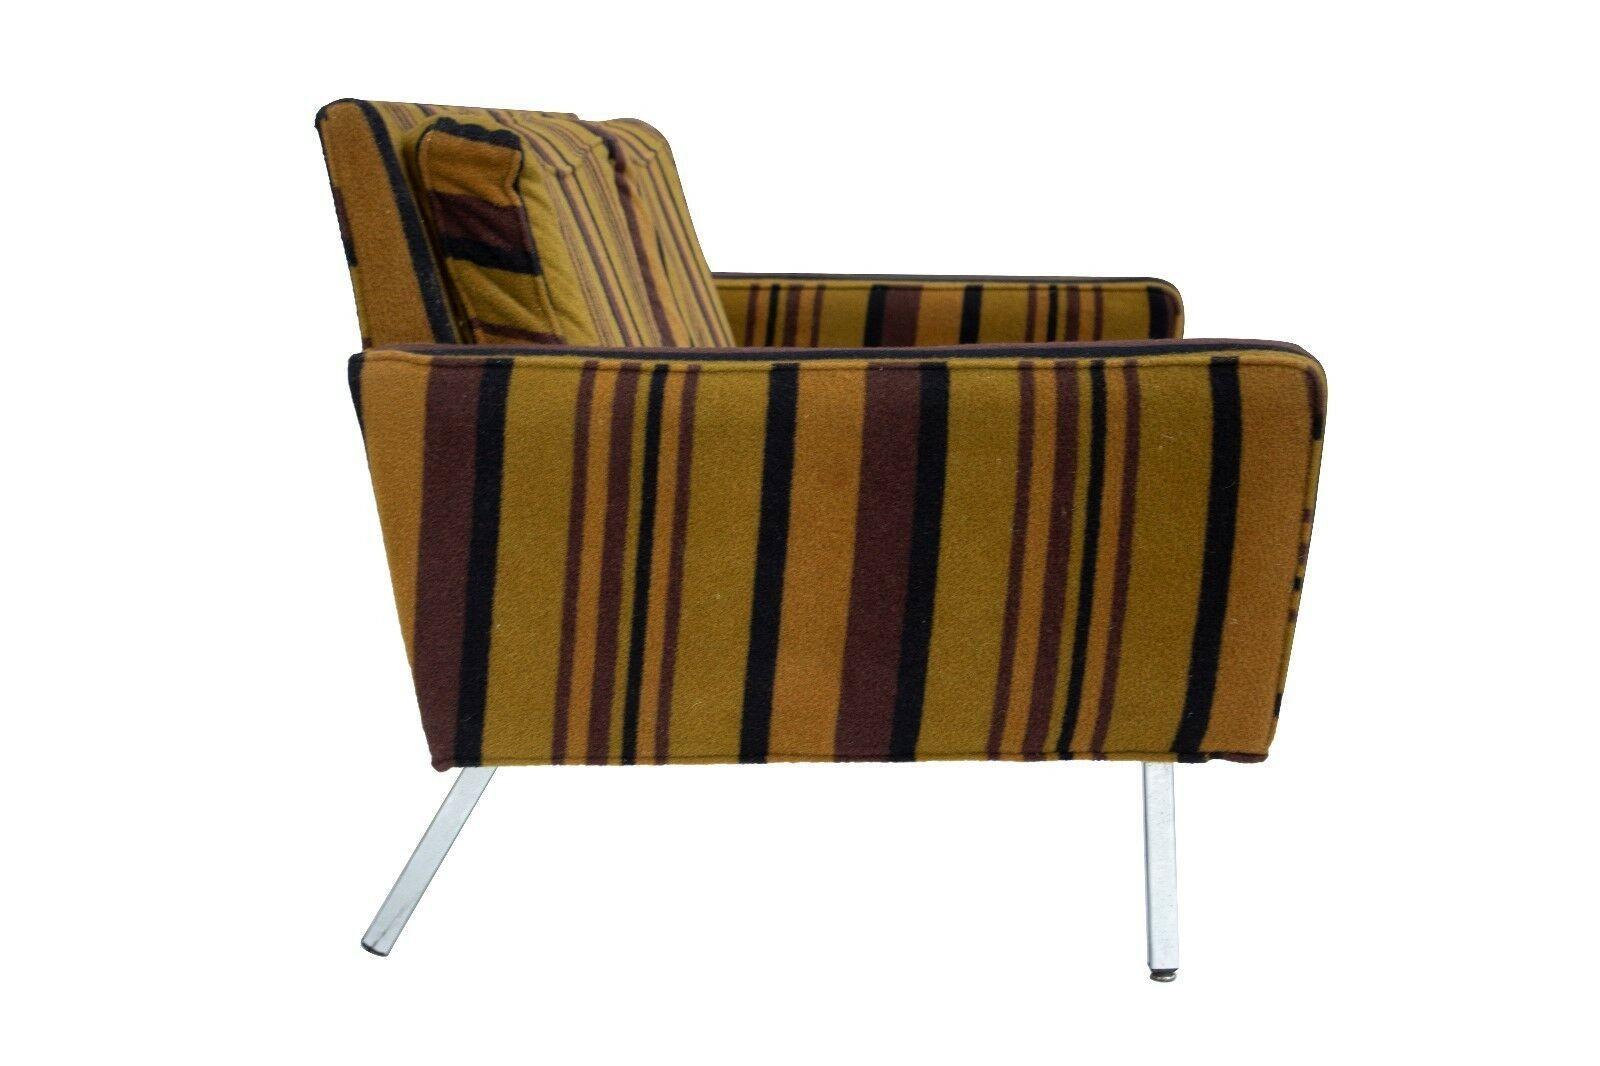 USA, 1971
Angular Loveseat in a fantastic wool stripe made by Wolverine Furniture. The chrome legs are long and angled; the front two legs each have leveling feet. This would work very nicely at the foot of a bed. 
CONDITION NOTES: This sofa has